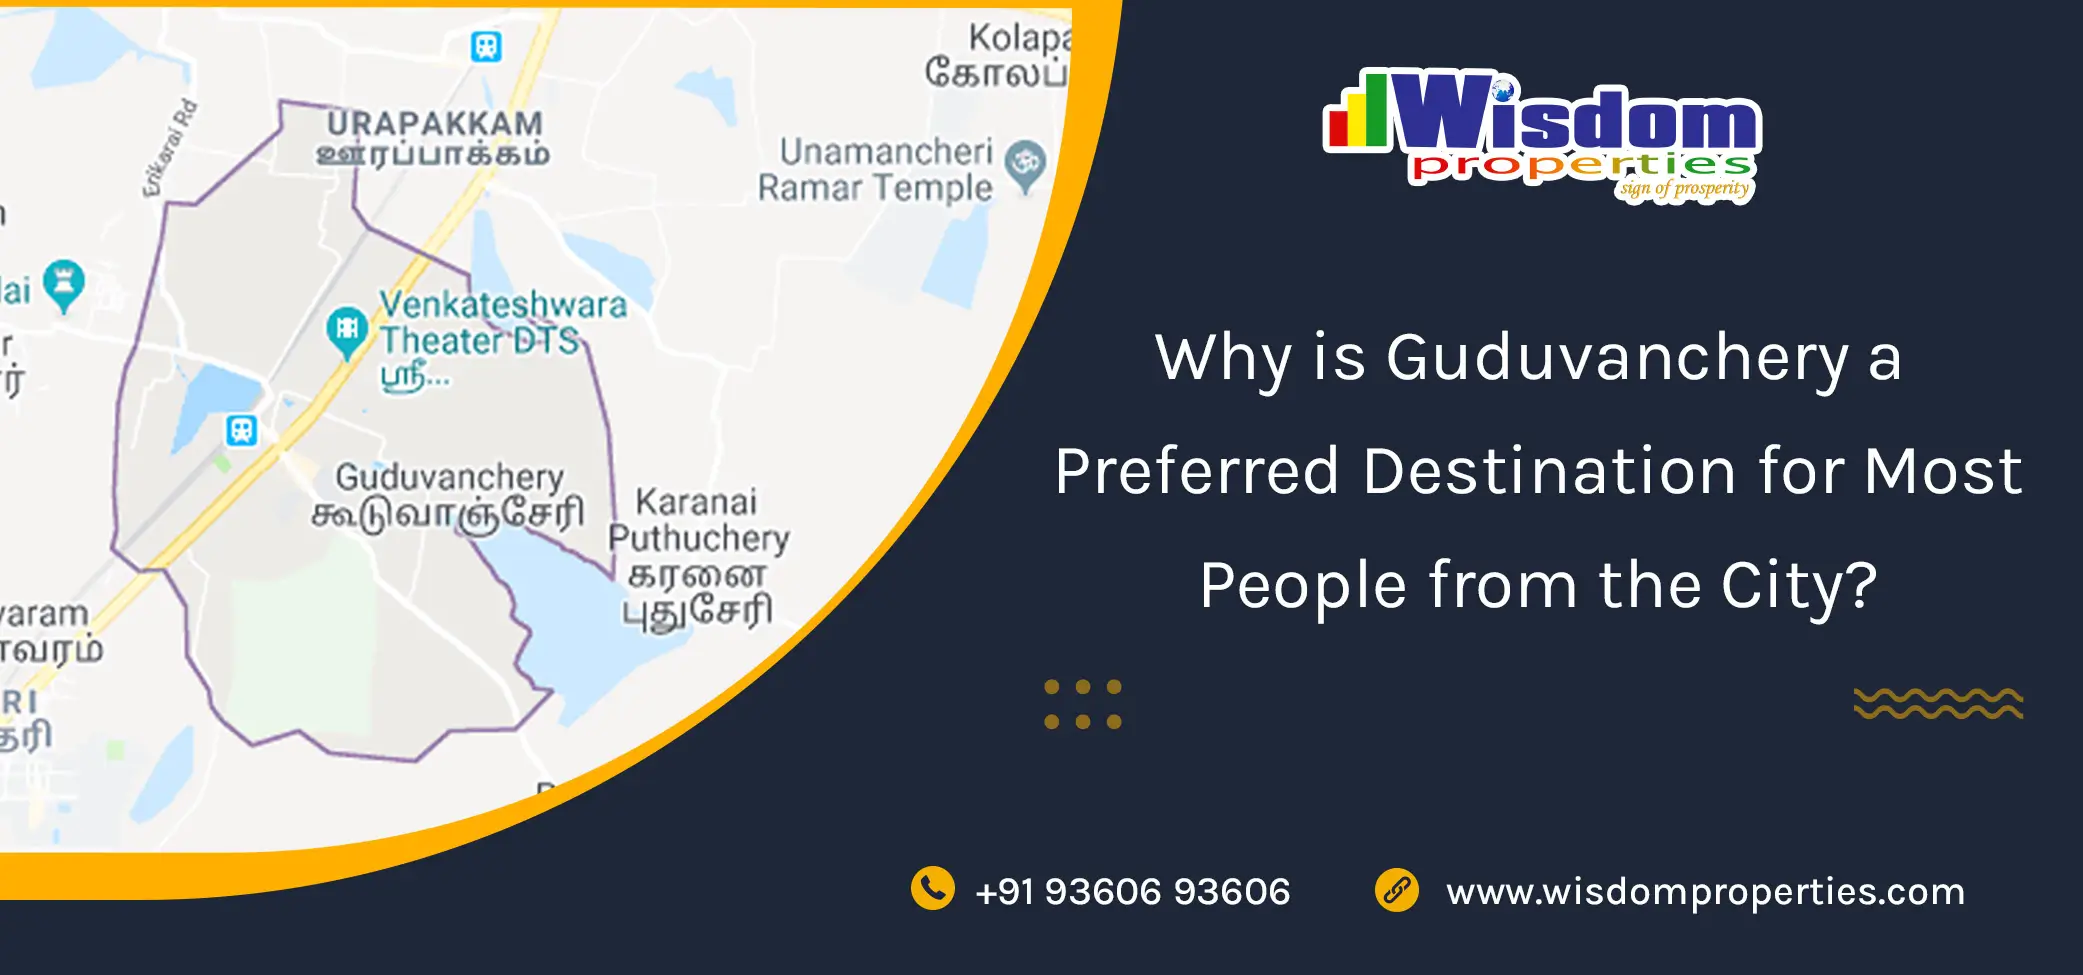 Why is Guduvanchery a Preferred Destination for Most People from Chennai City